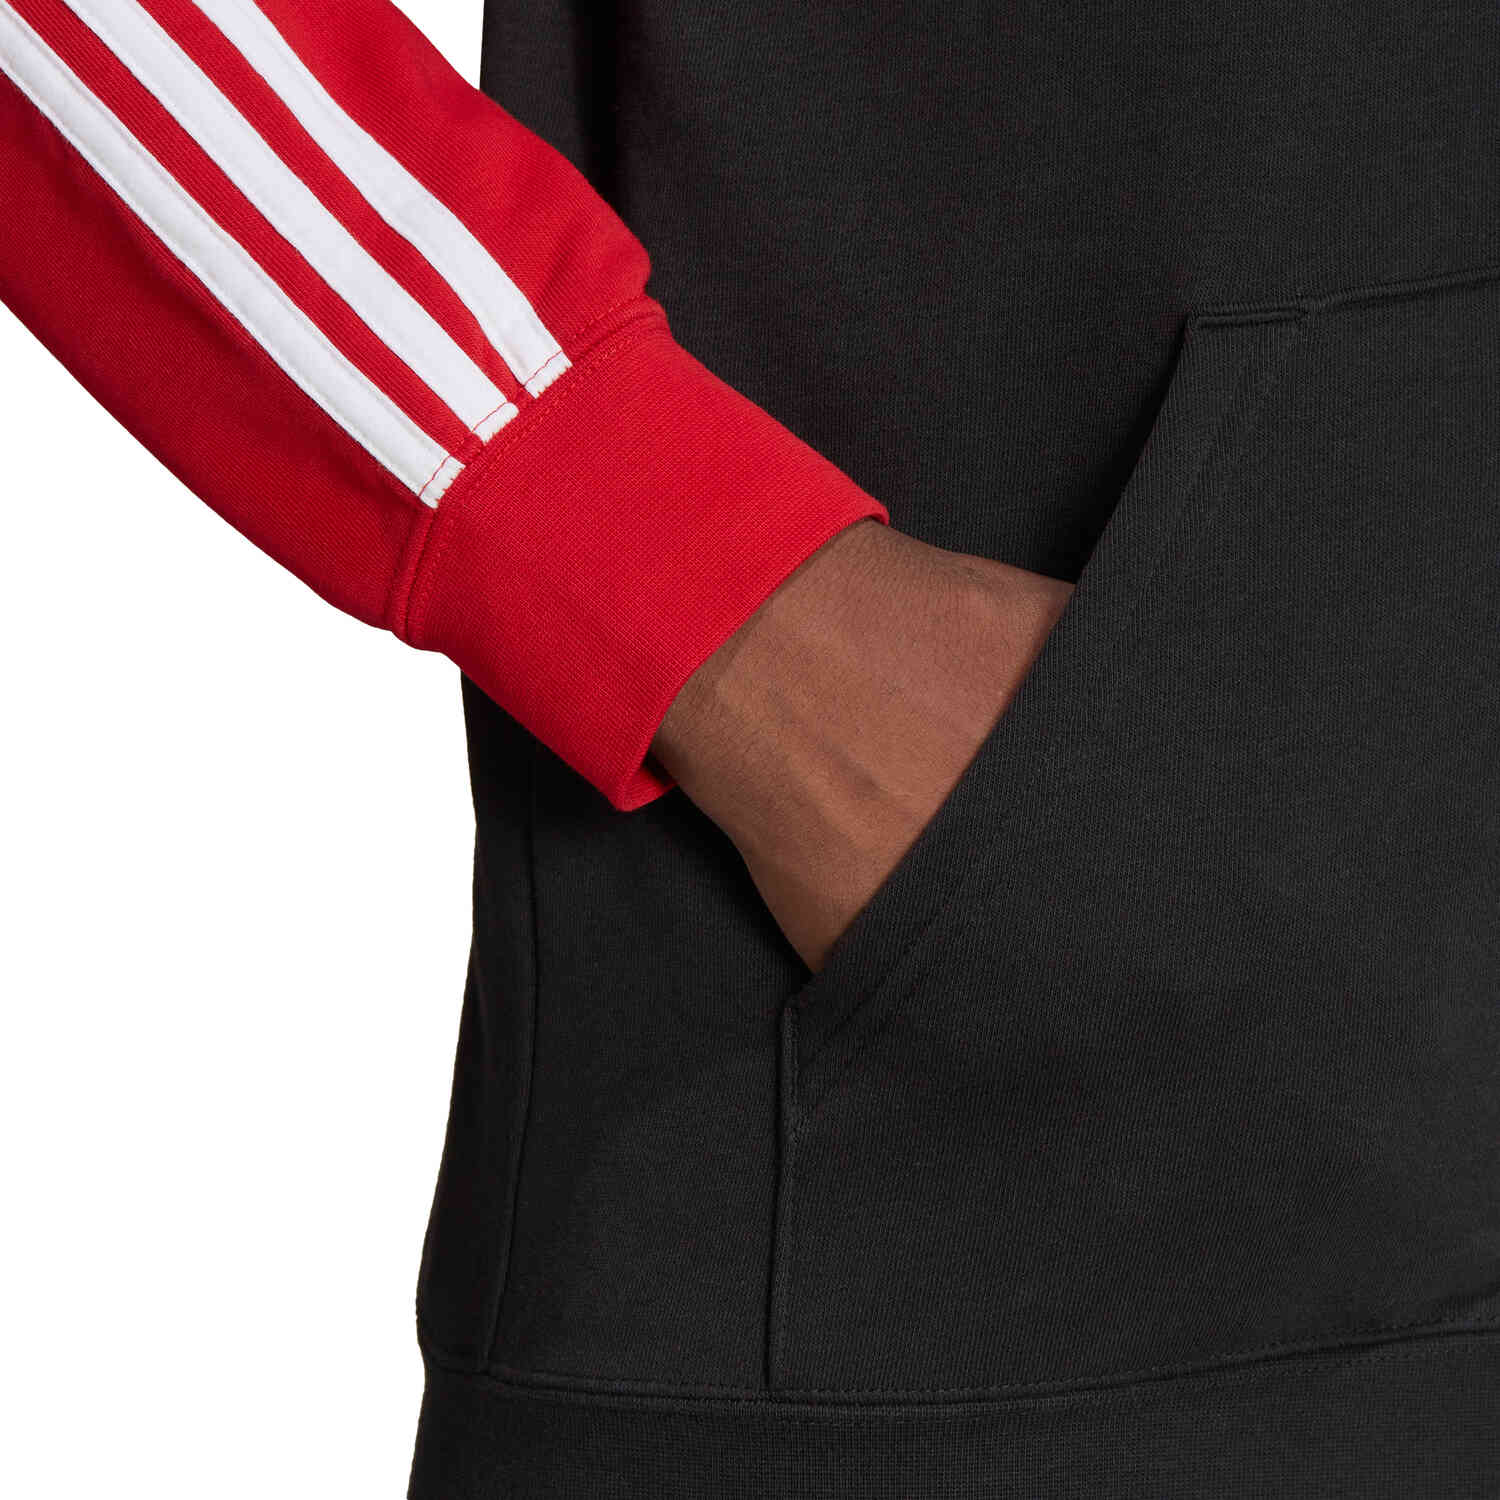 adidas Manchester United 3-Stripes Full-zip Hoodie - Real Red/Black ...